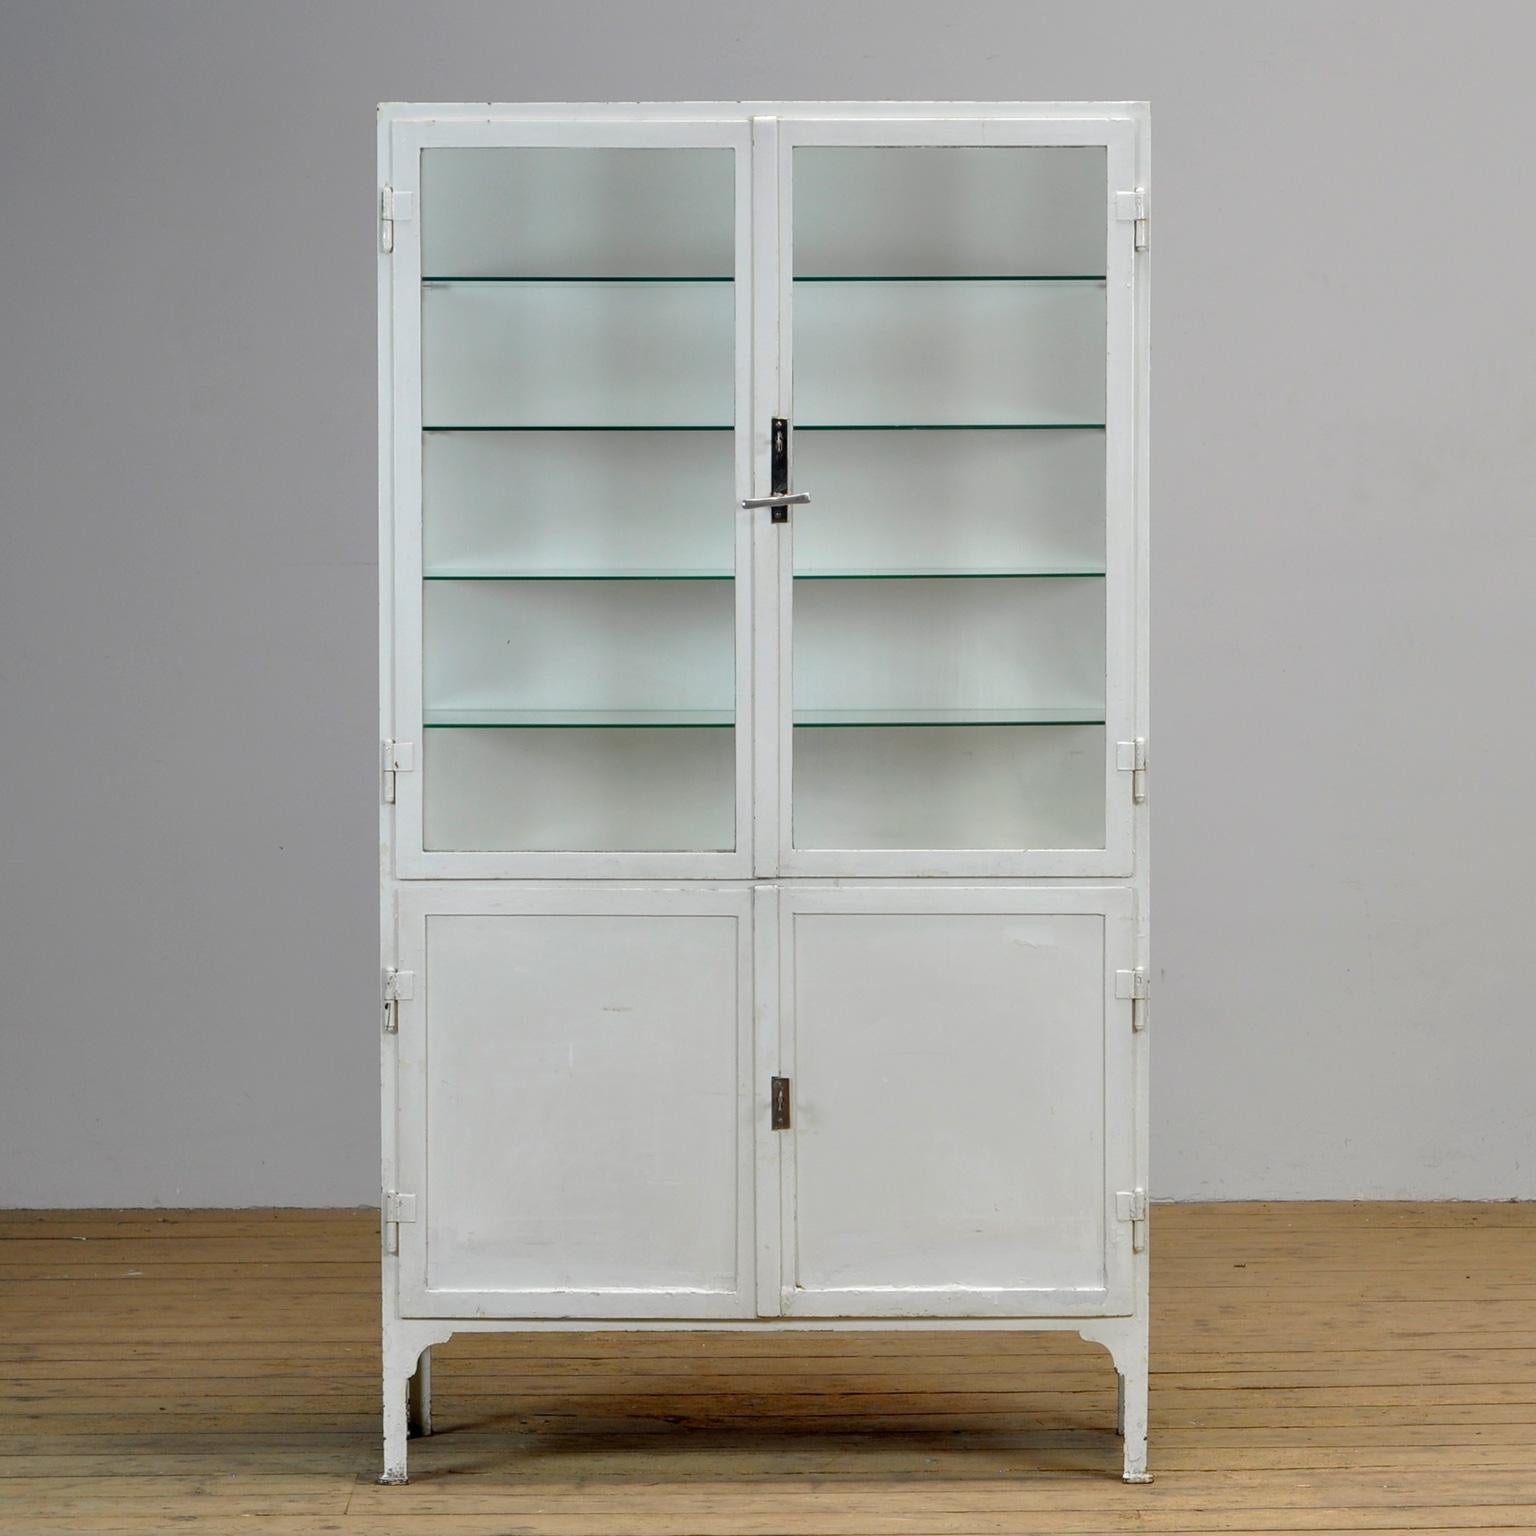 Medical cabinet from the 1930s. The cabinet is produced in hungary and is made of thick iron and antique glass. The locks and handle are original and functional.
